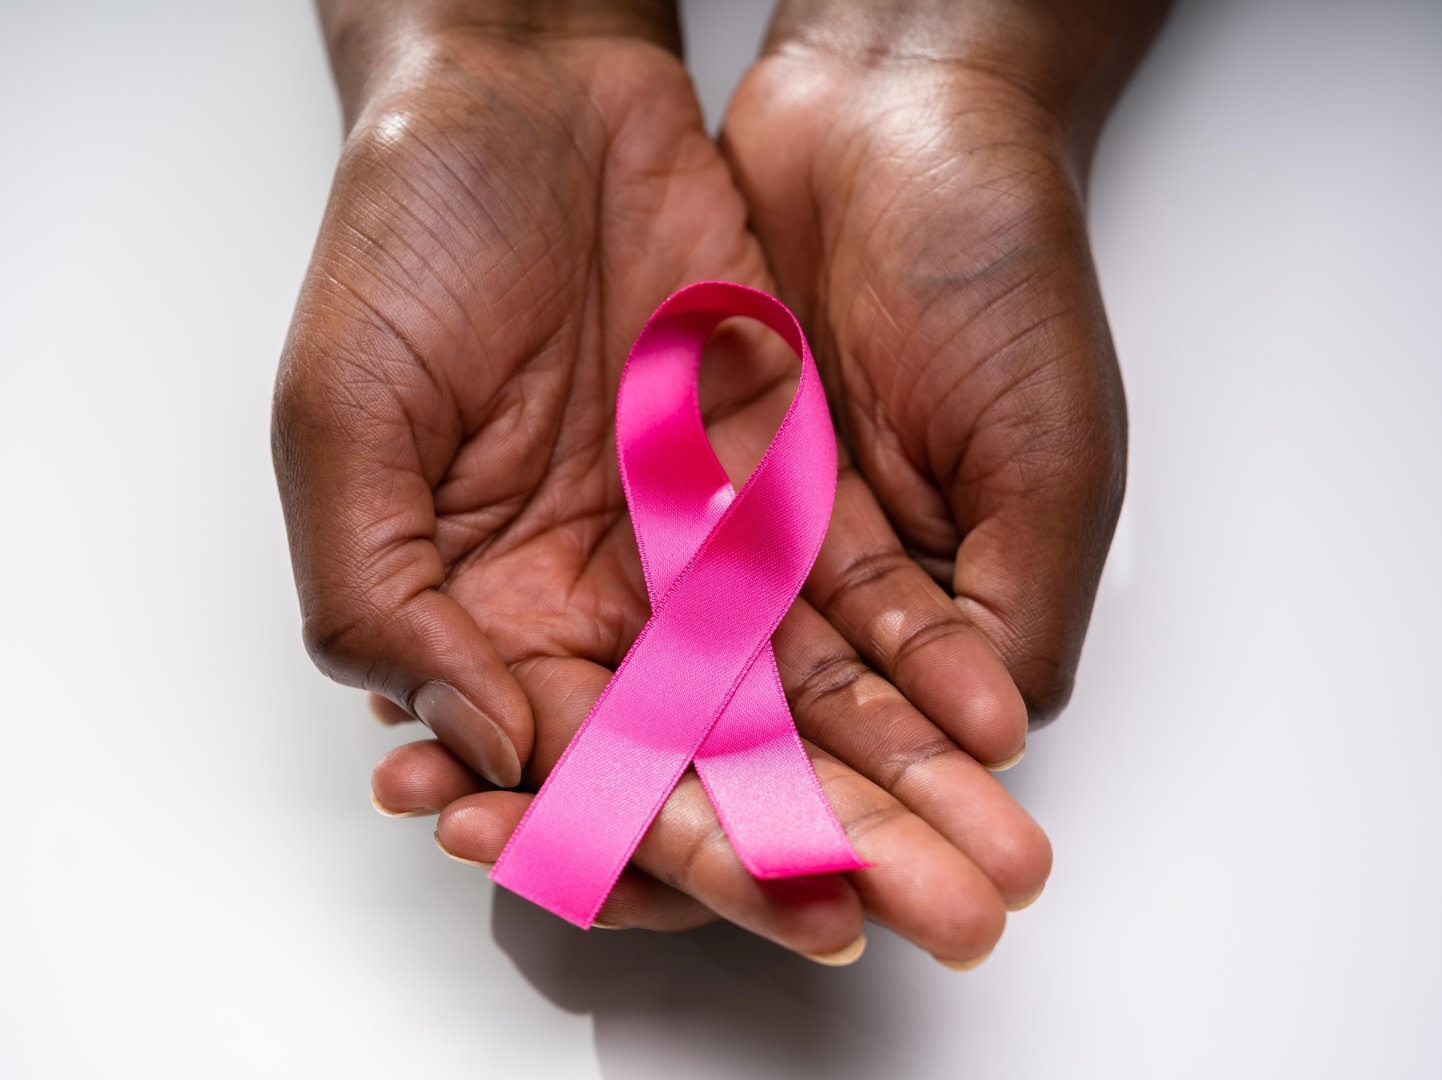 Some breast cancer patients can retain lymph nodes, avoiding lymphedema